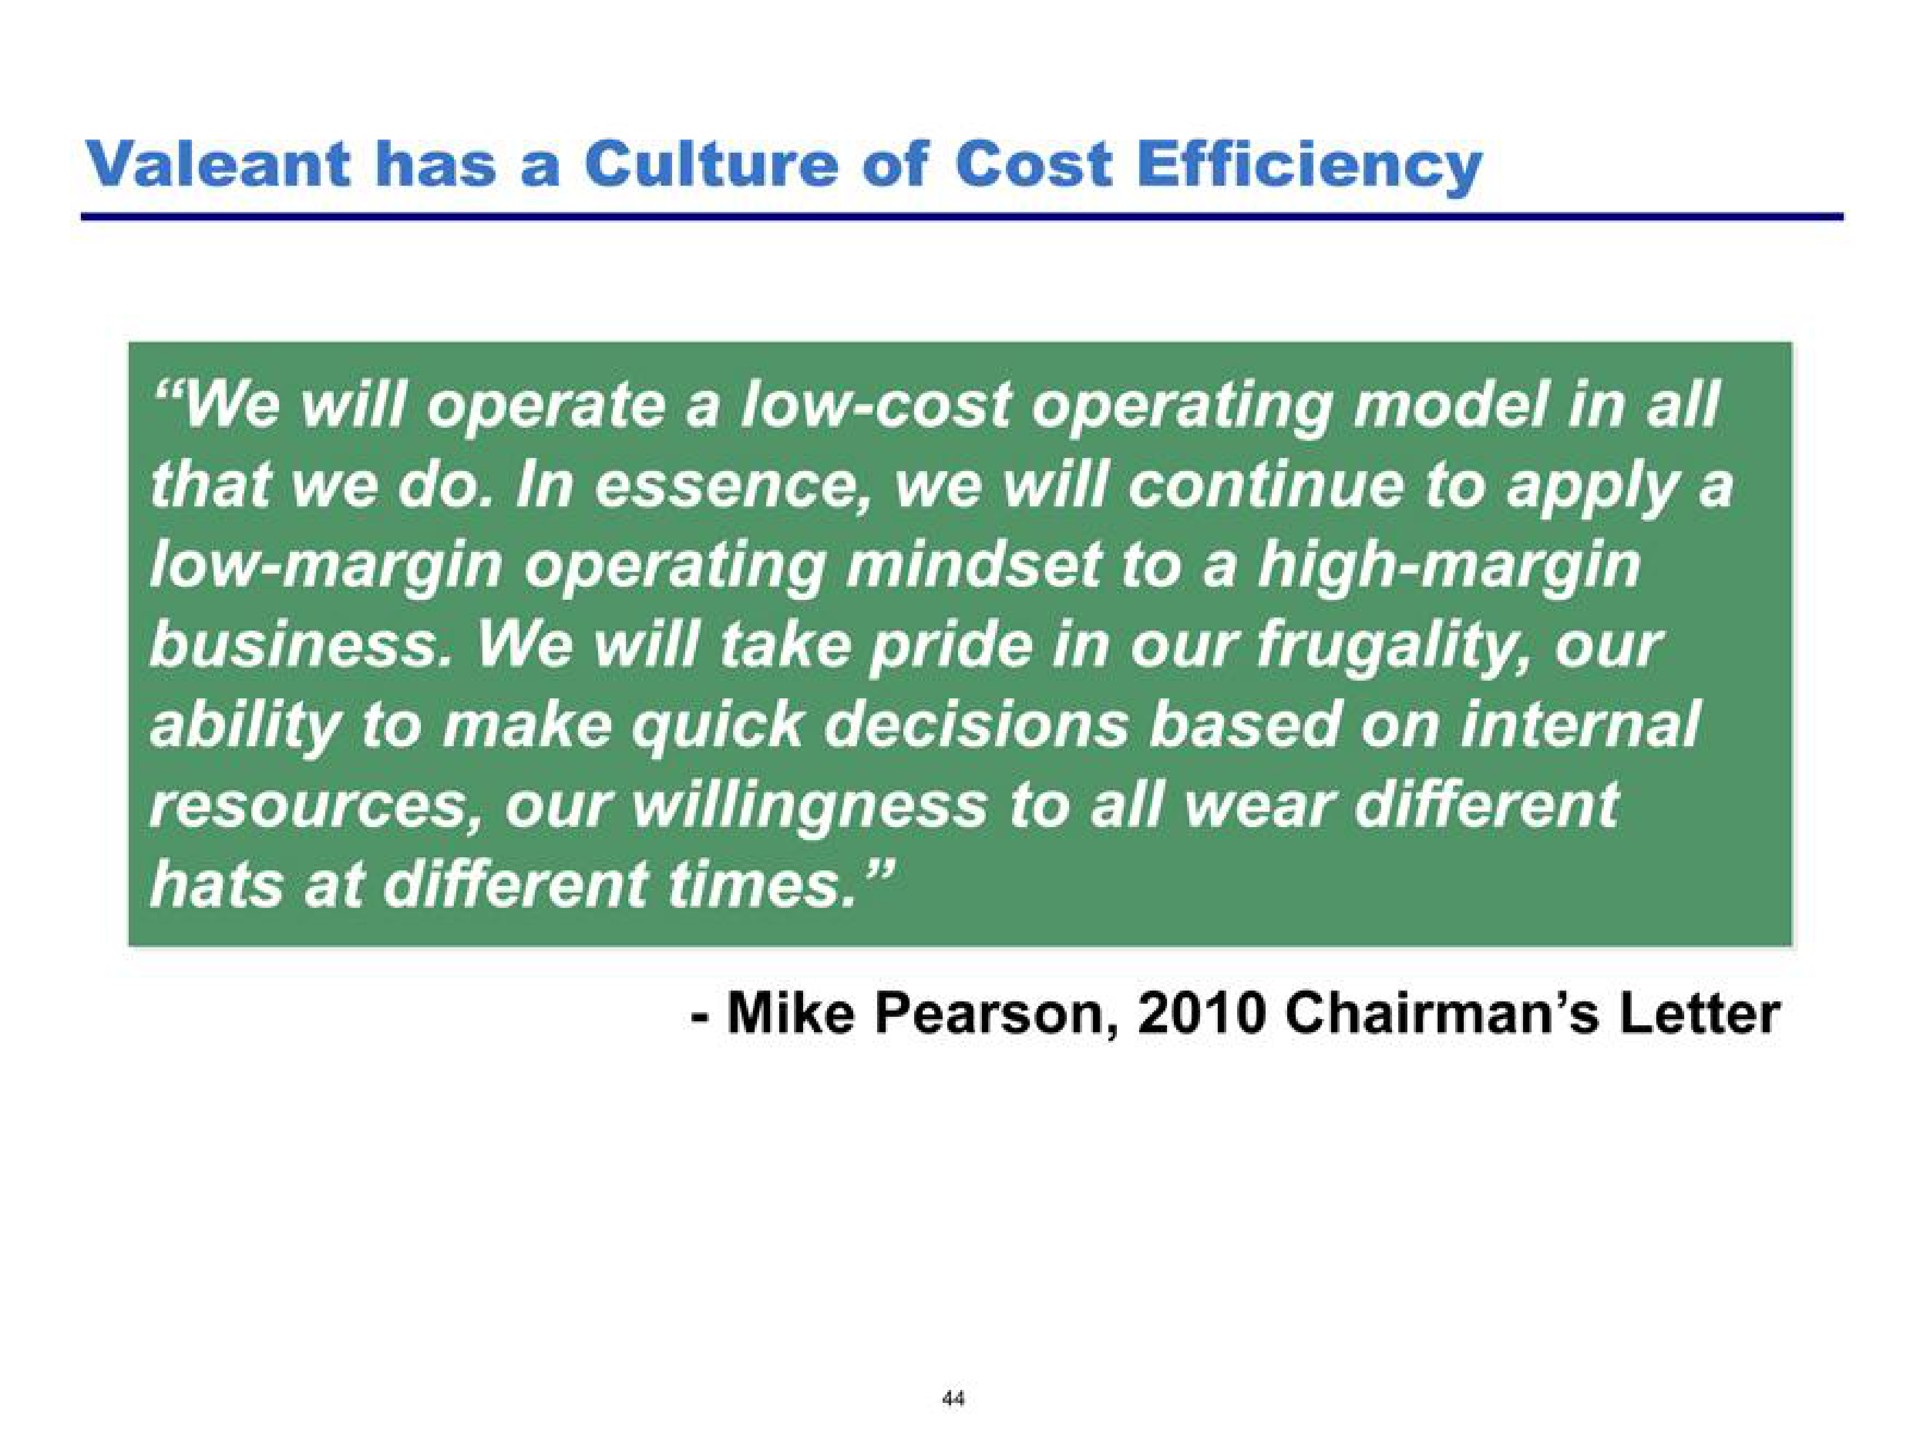 has a culture of cost efficiency we will operate a low cost operating model in all that we do in essence we will continue to apply a low margin operating to a high margin business we will take pride in our frugality our ability to make quick decisions based on internal resources our willingness to all wear different hats at different times | Pershing Square